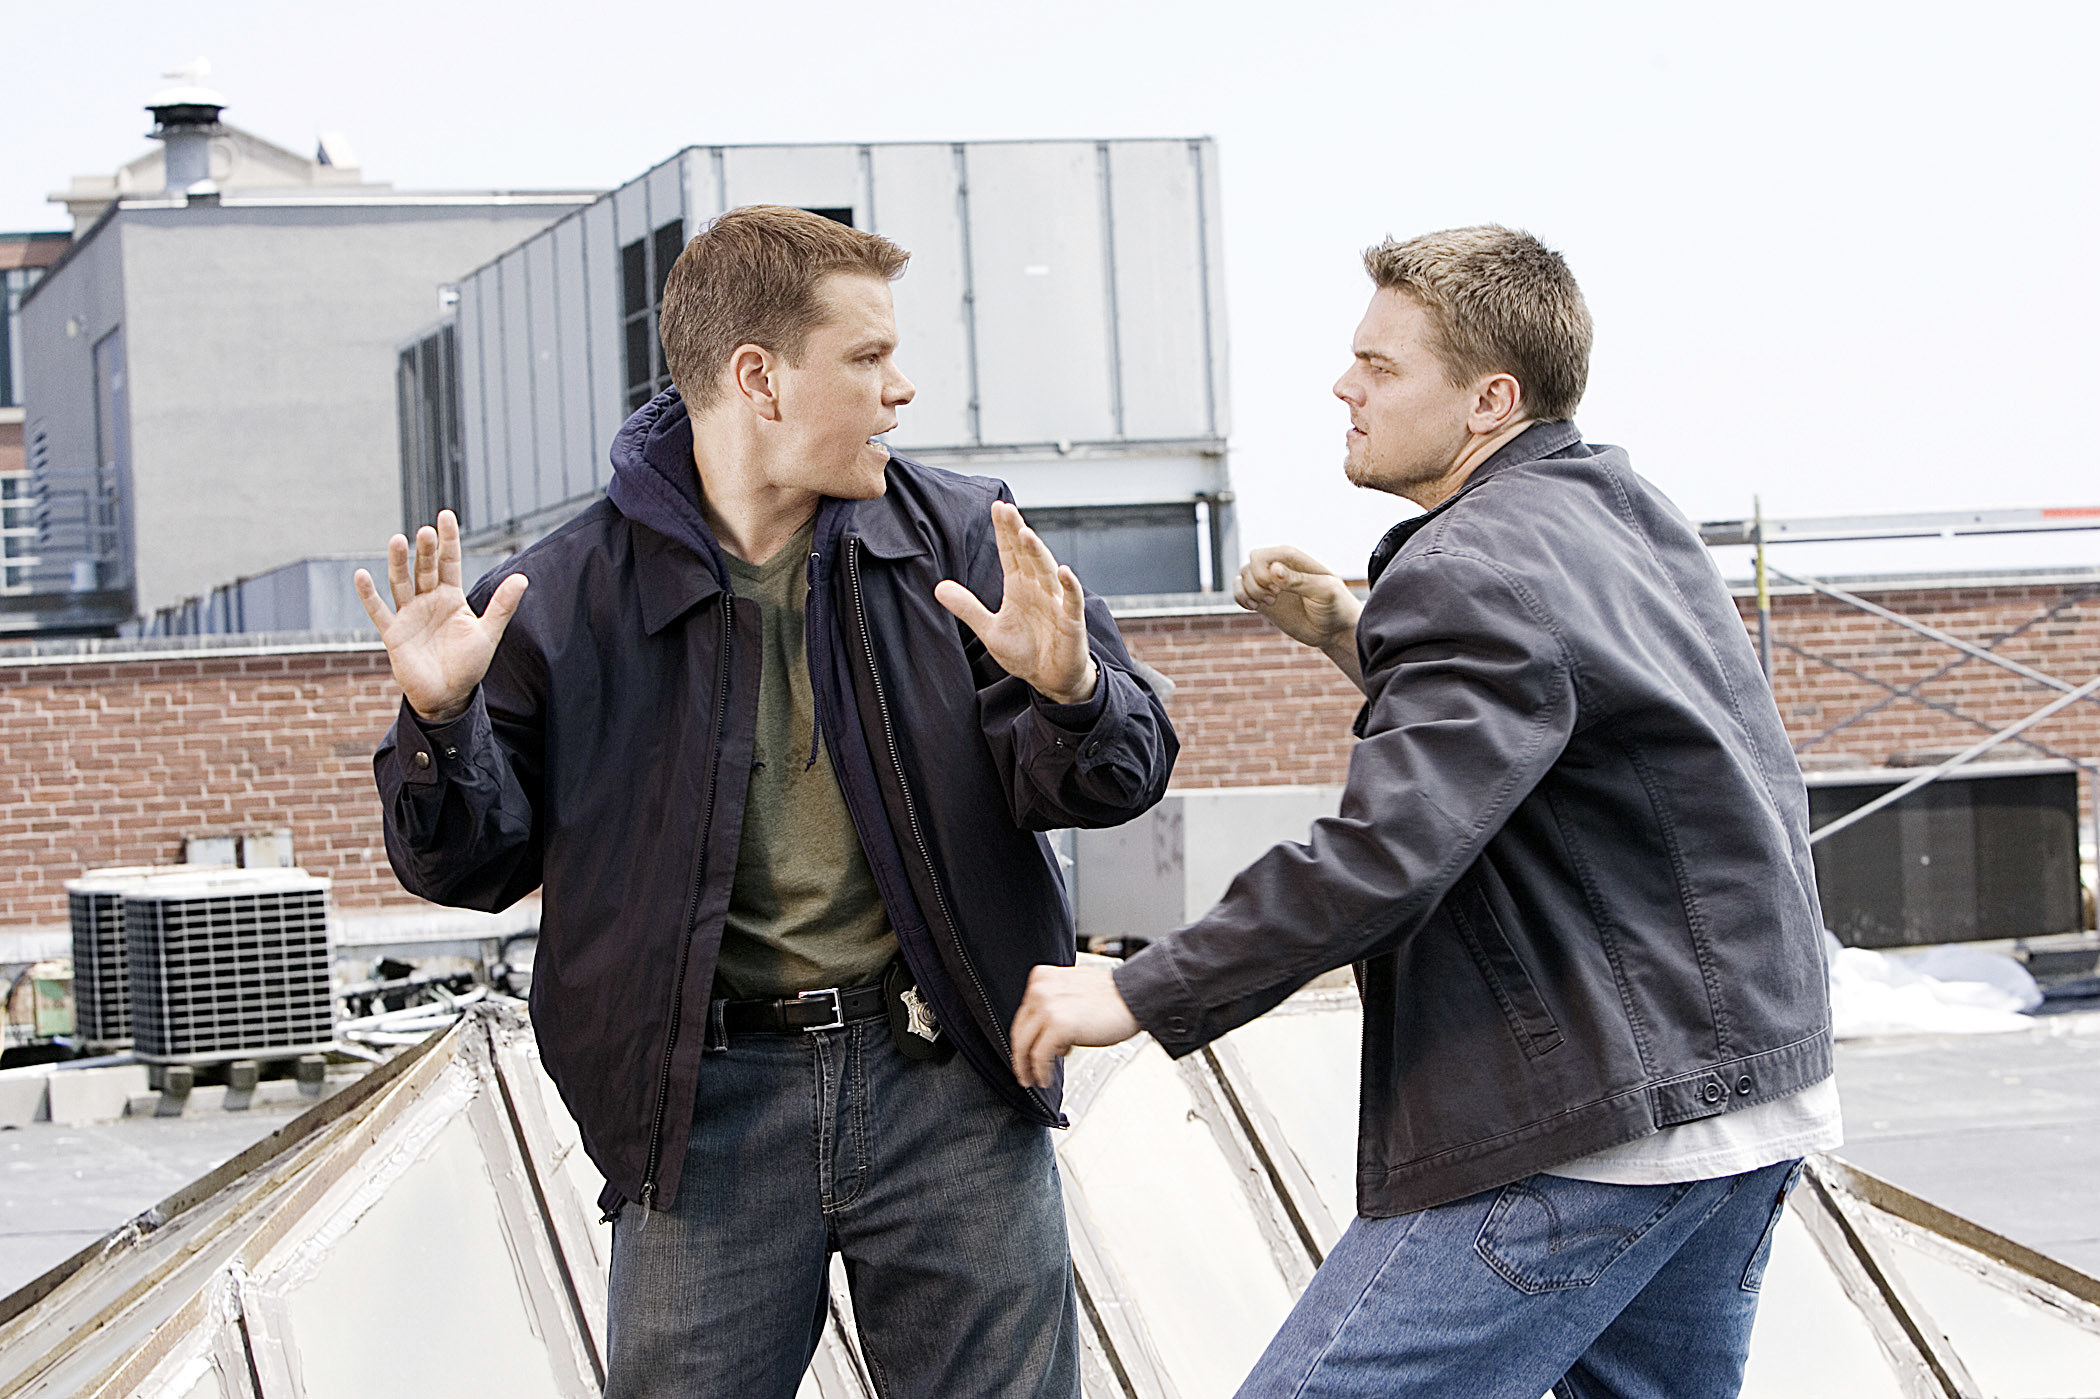 Matt Damon and Leonardo DiCaprio on the roof at the end of the film